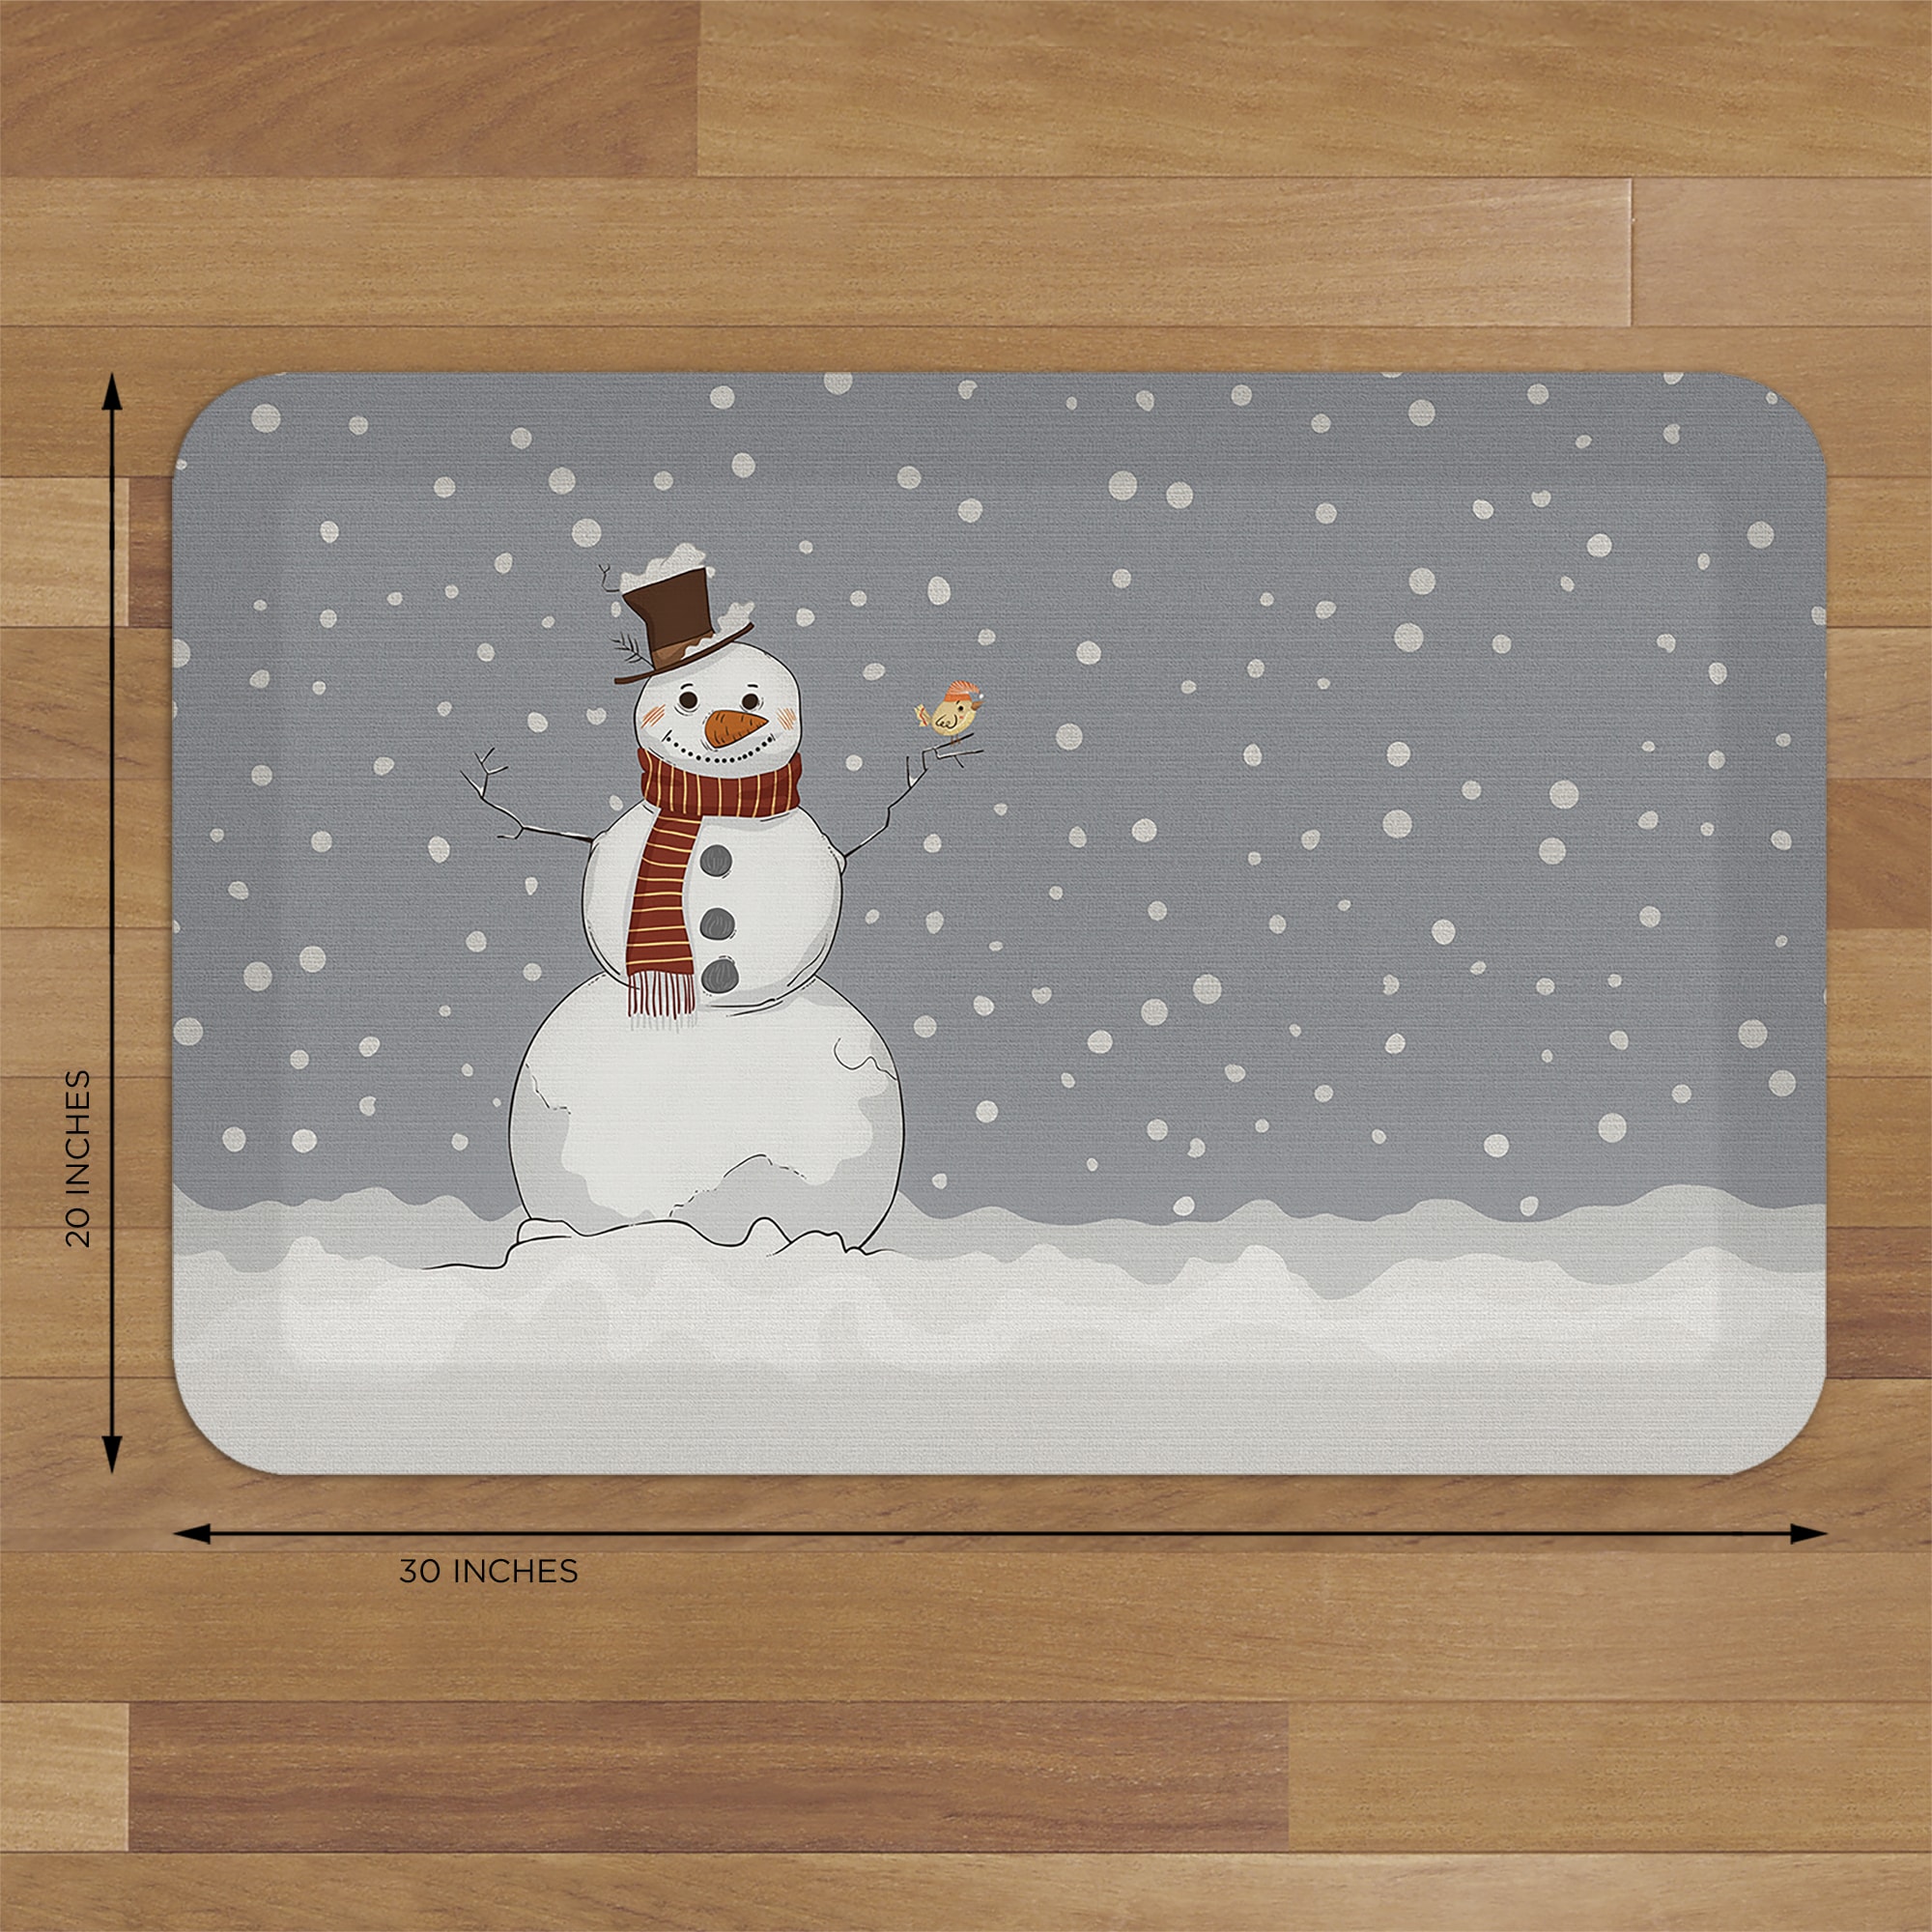 GelPro 0.625-in Holiday Mat Snowman Christmas Decor in the